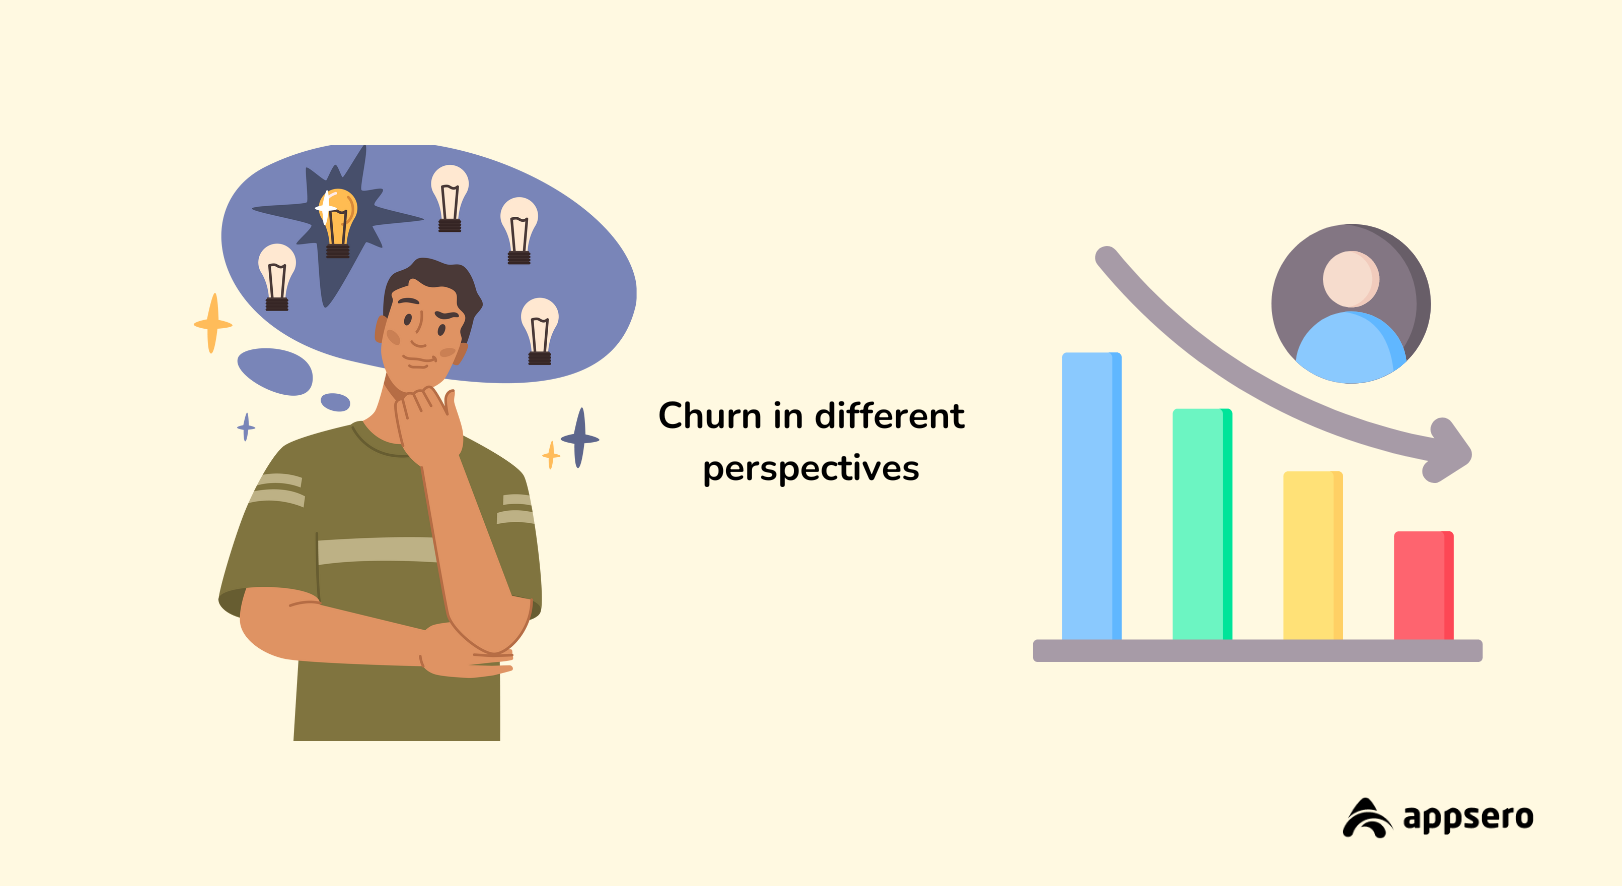 Churn in different perspectives